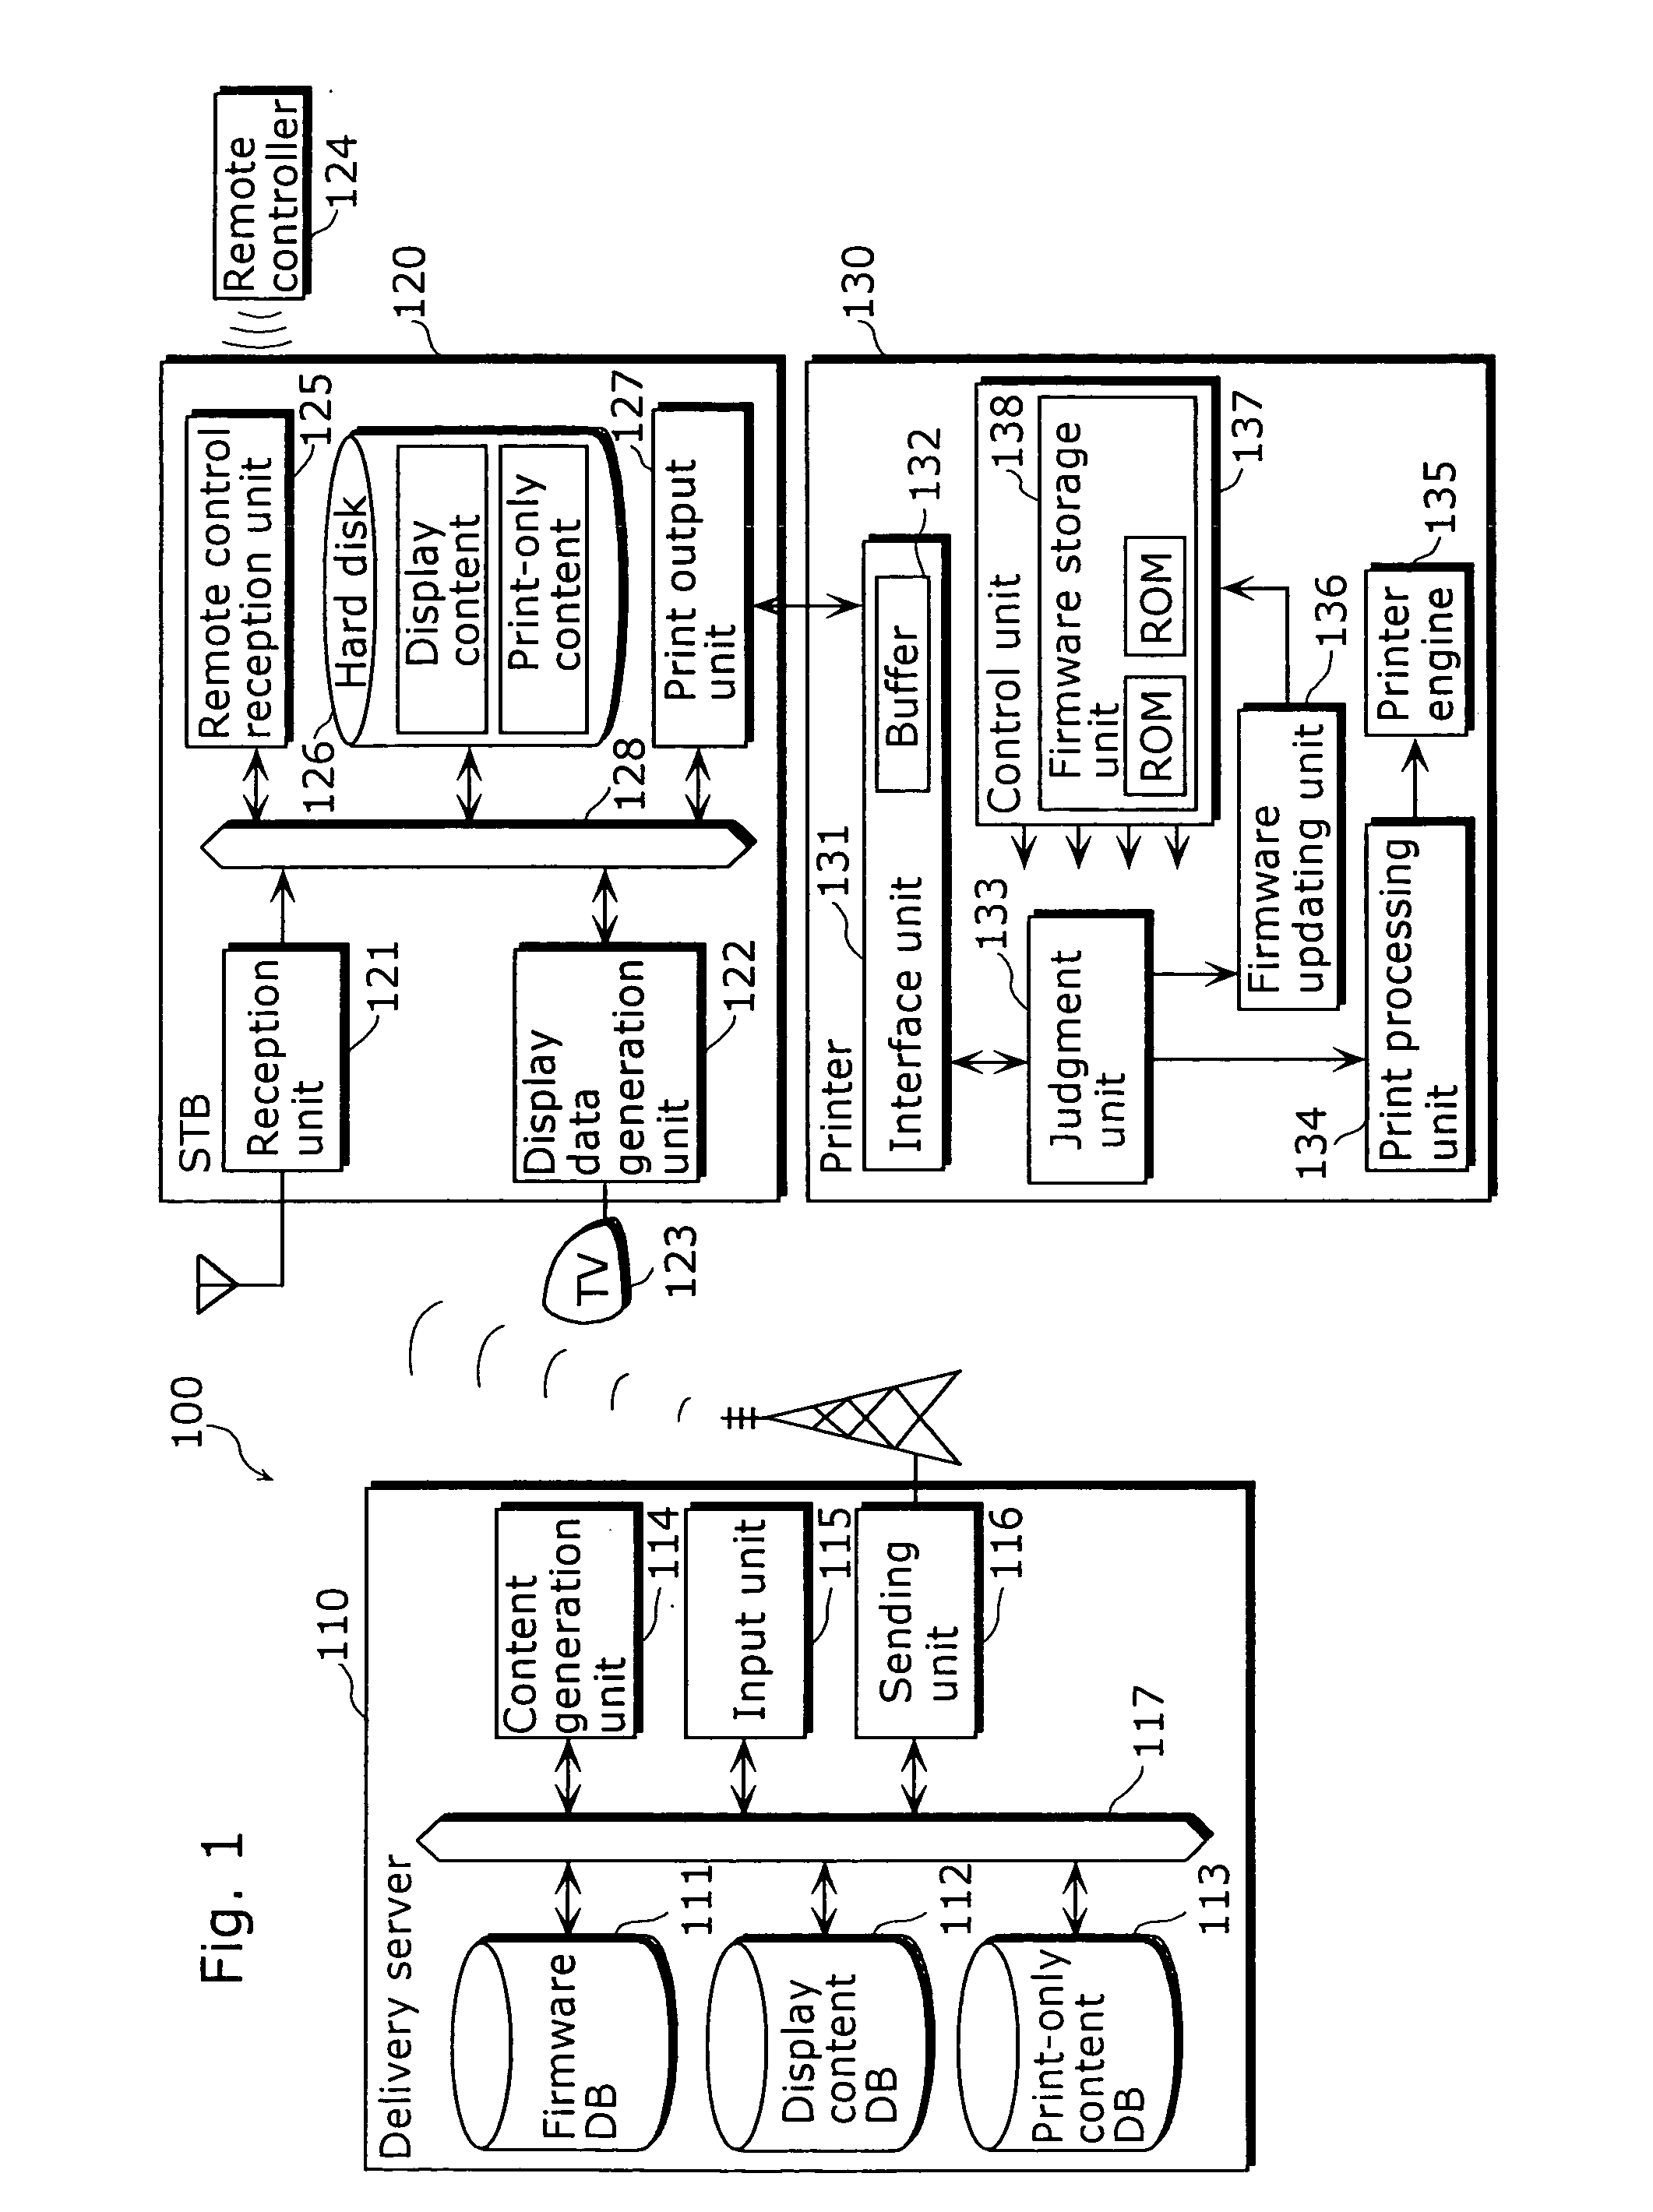 Receiving device, printer, and firmware update system